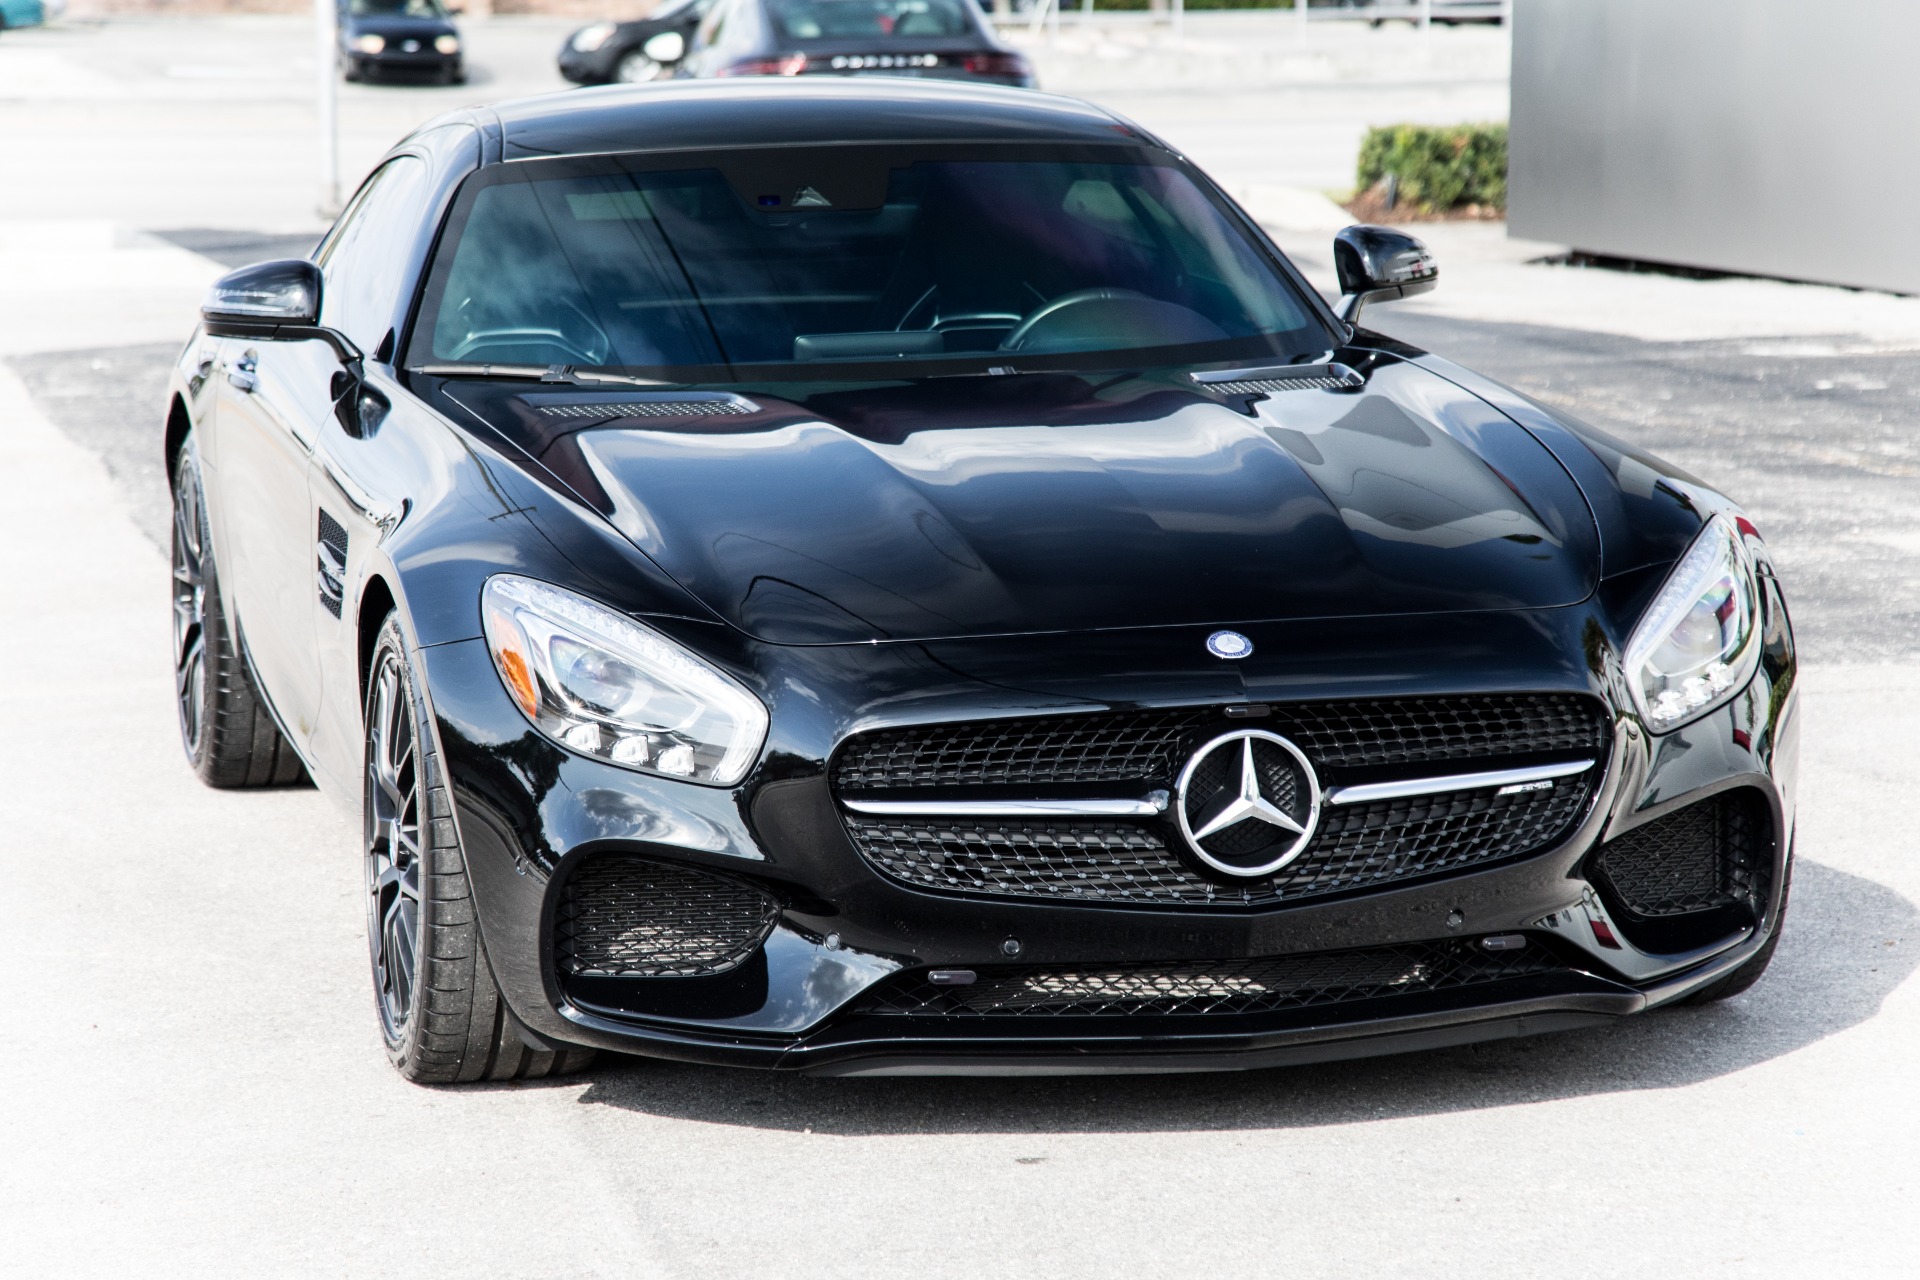 Used 2017 Mercedes Benz AMG GT S For Sale 84 900 Marino 